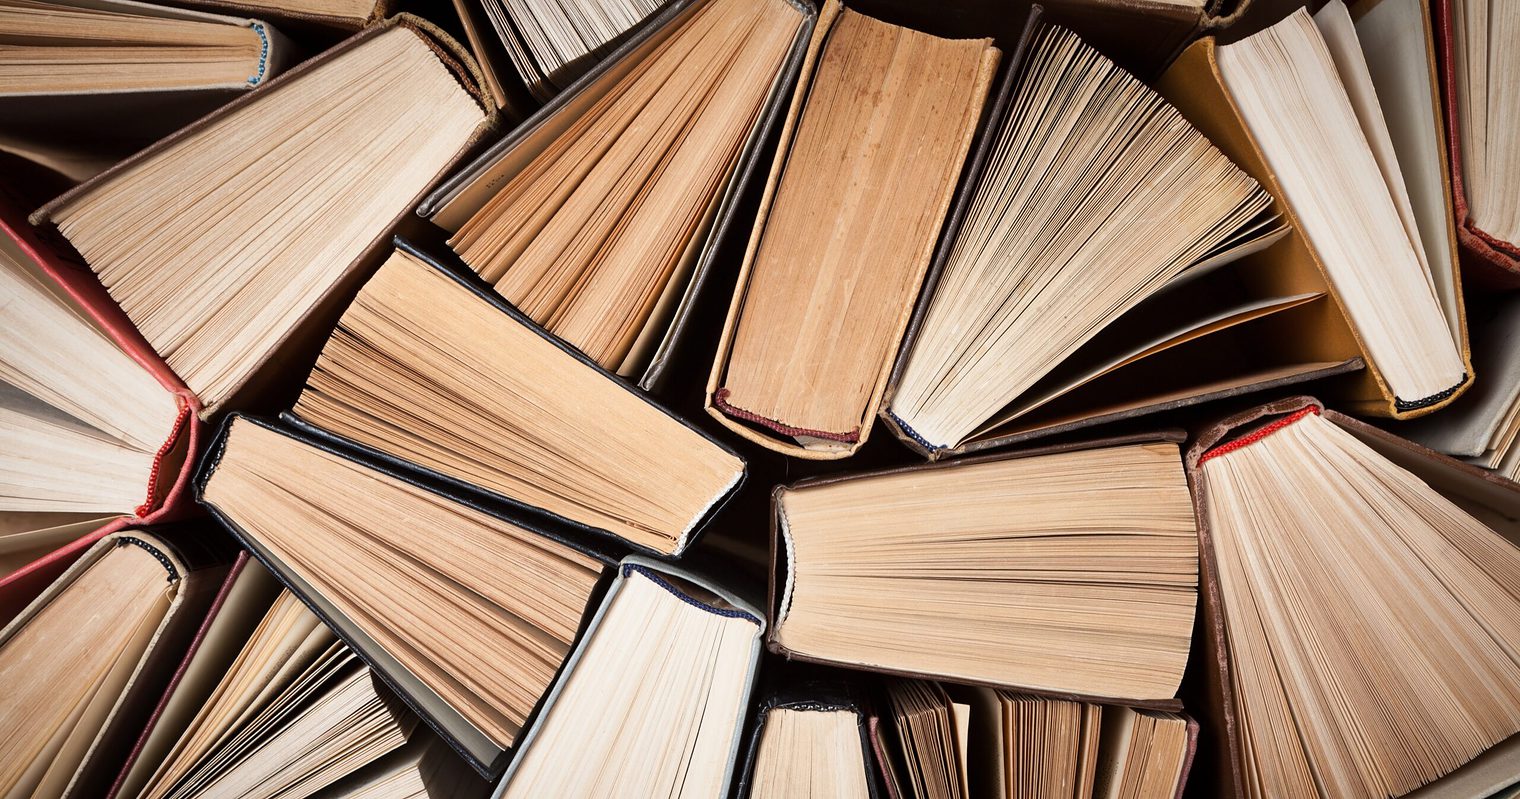 Google Celebrates National Book Lovers’ Day By Revealing Search Data And More